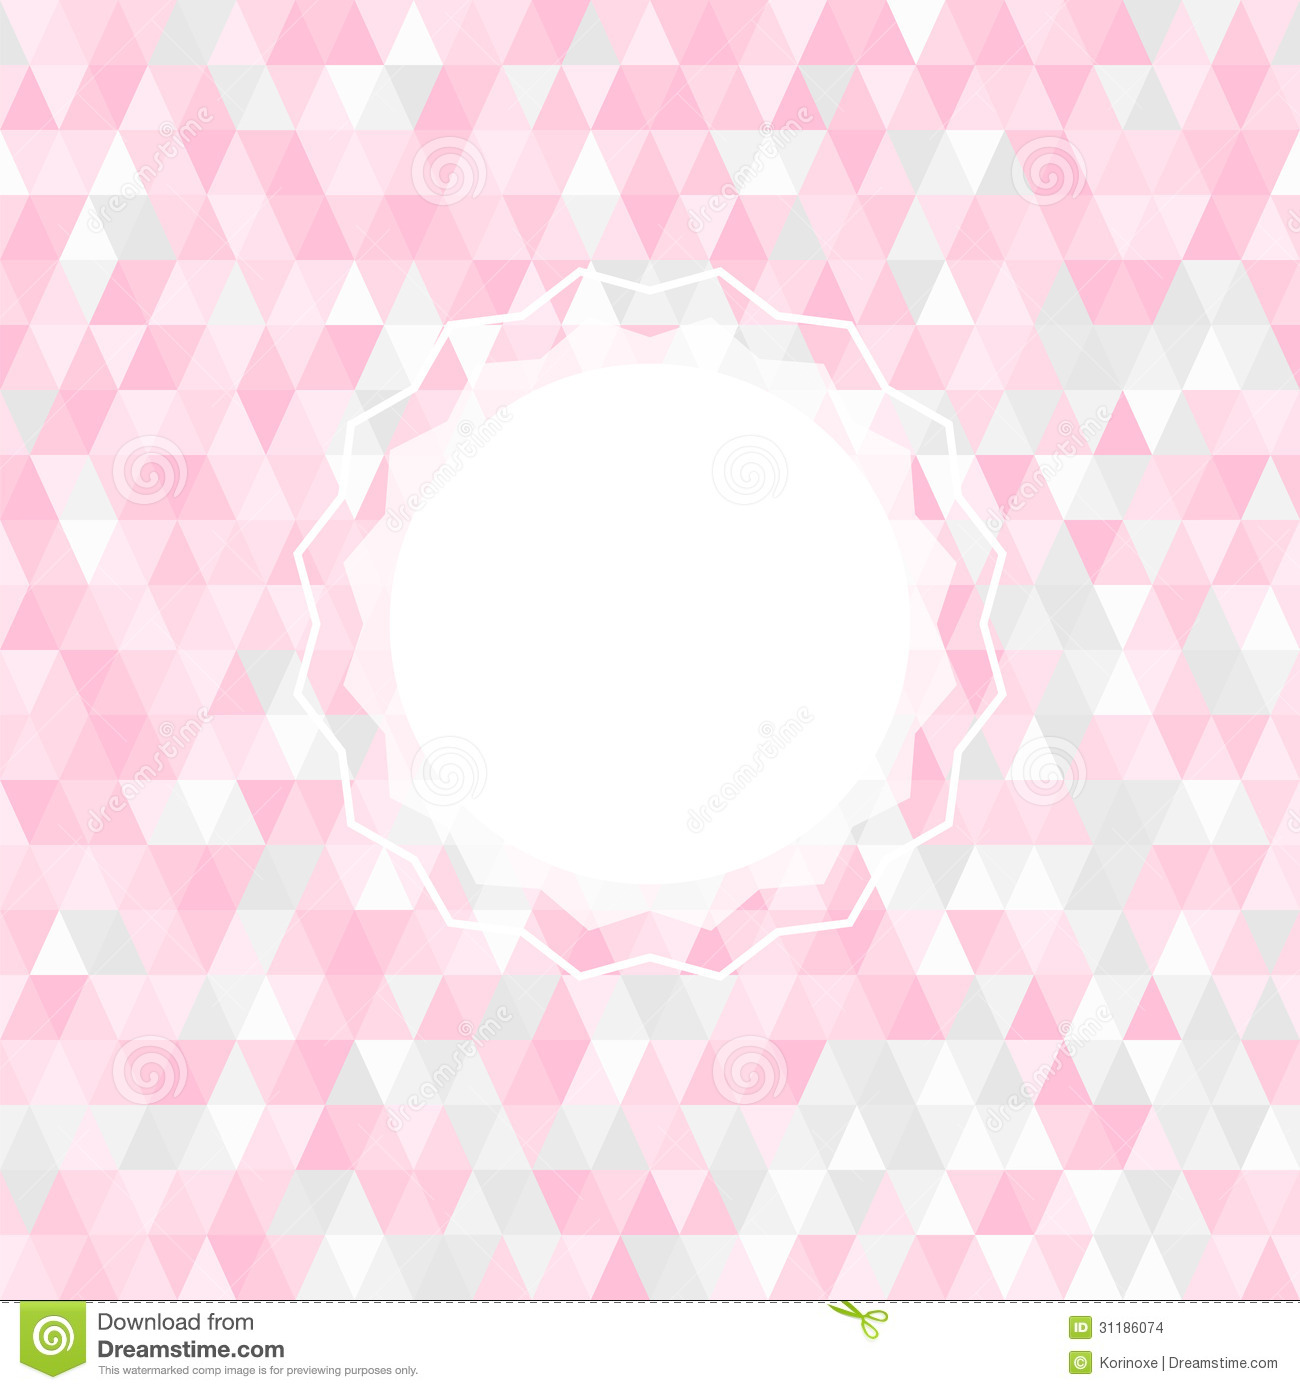 White Triangle with Transparent Background